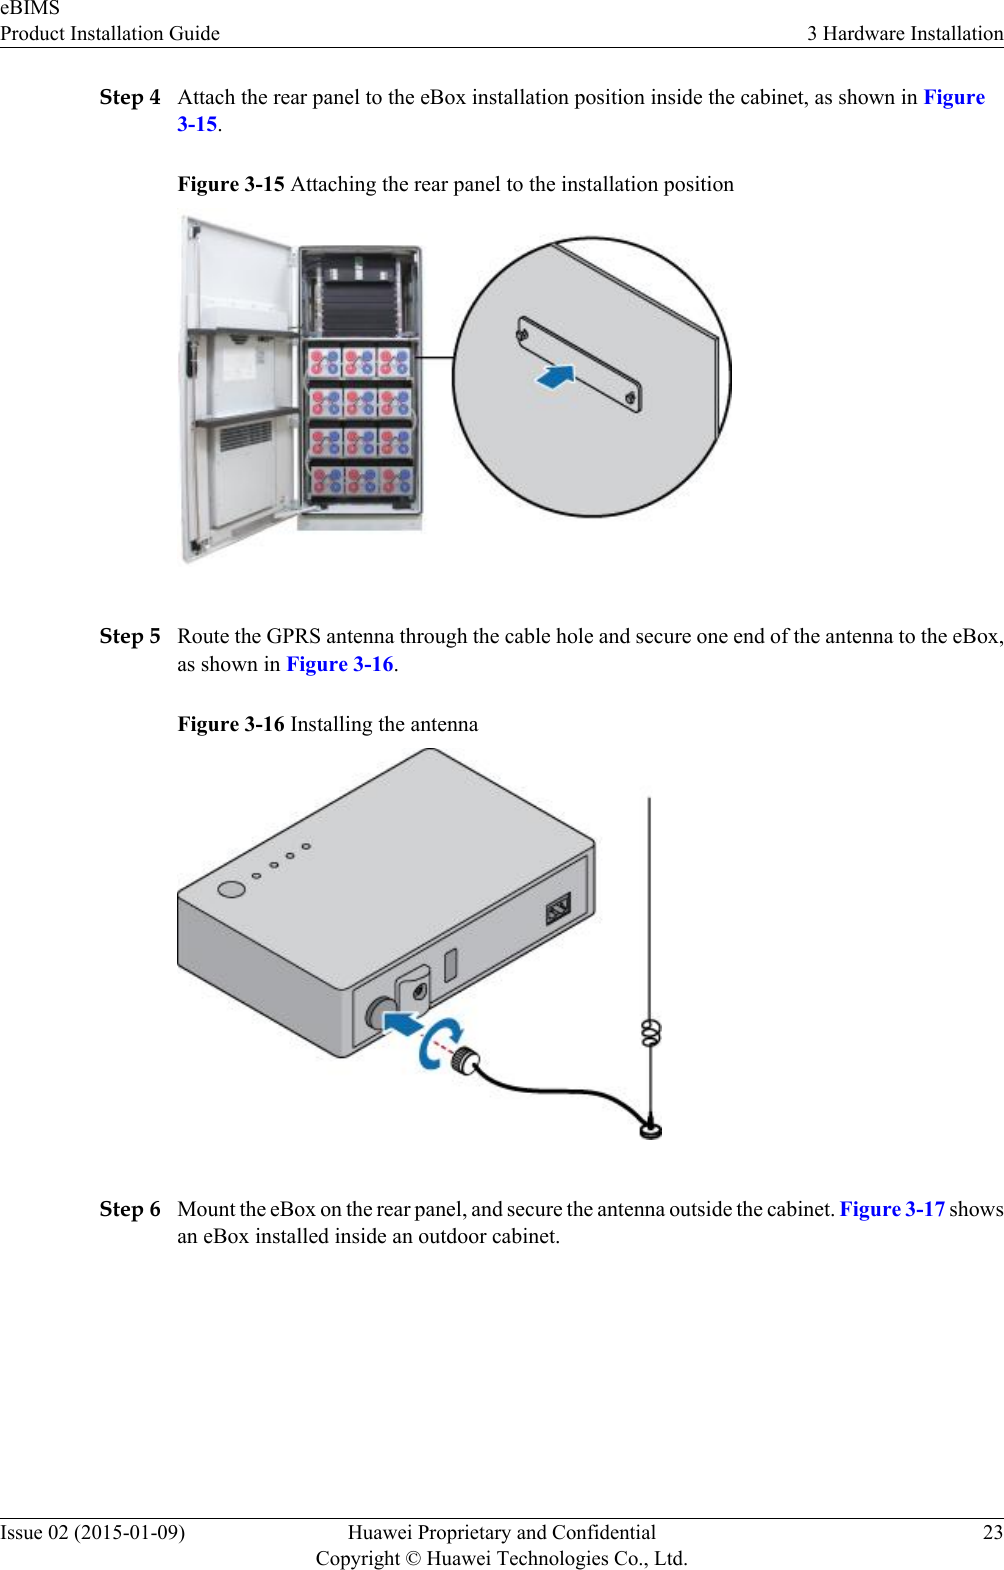 Step 4 Attach the rear panel to the eBox installation position inside the cabinet, as shown in Figure3-15.Figure 3-15 Attaching the rear panel to the installation positionStep 5 Route the GPRS antenna through the cable hole and secure one end of the antenna to the eBox,as shown in Figure 3-16.Figure 3-16 Installing the antennaStep 6 Mount the eBox on the rear panel, and secure the antenna outside the cabinet. Figure 3-17 showsan eBox installed inside an outdoor cabinet.eBIMSProduct Installation Guide 3 Hardware InstallationIssue 02 (2015-01-09) Huawei Proprietary and ConfidentialCopyright © Huawei Technologies Co., Ltd.23